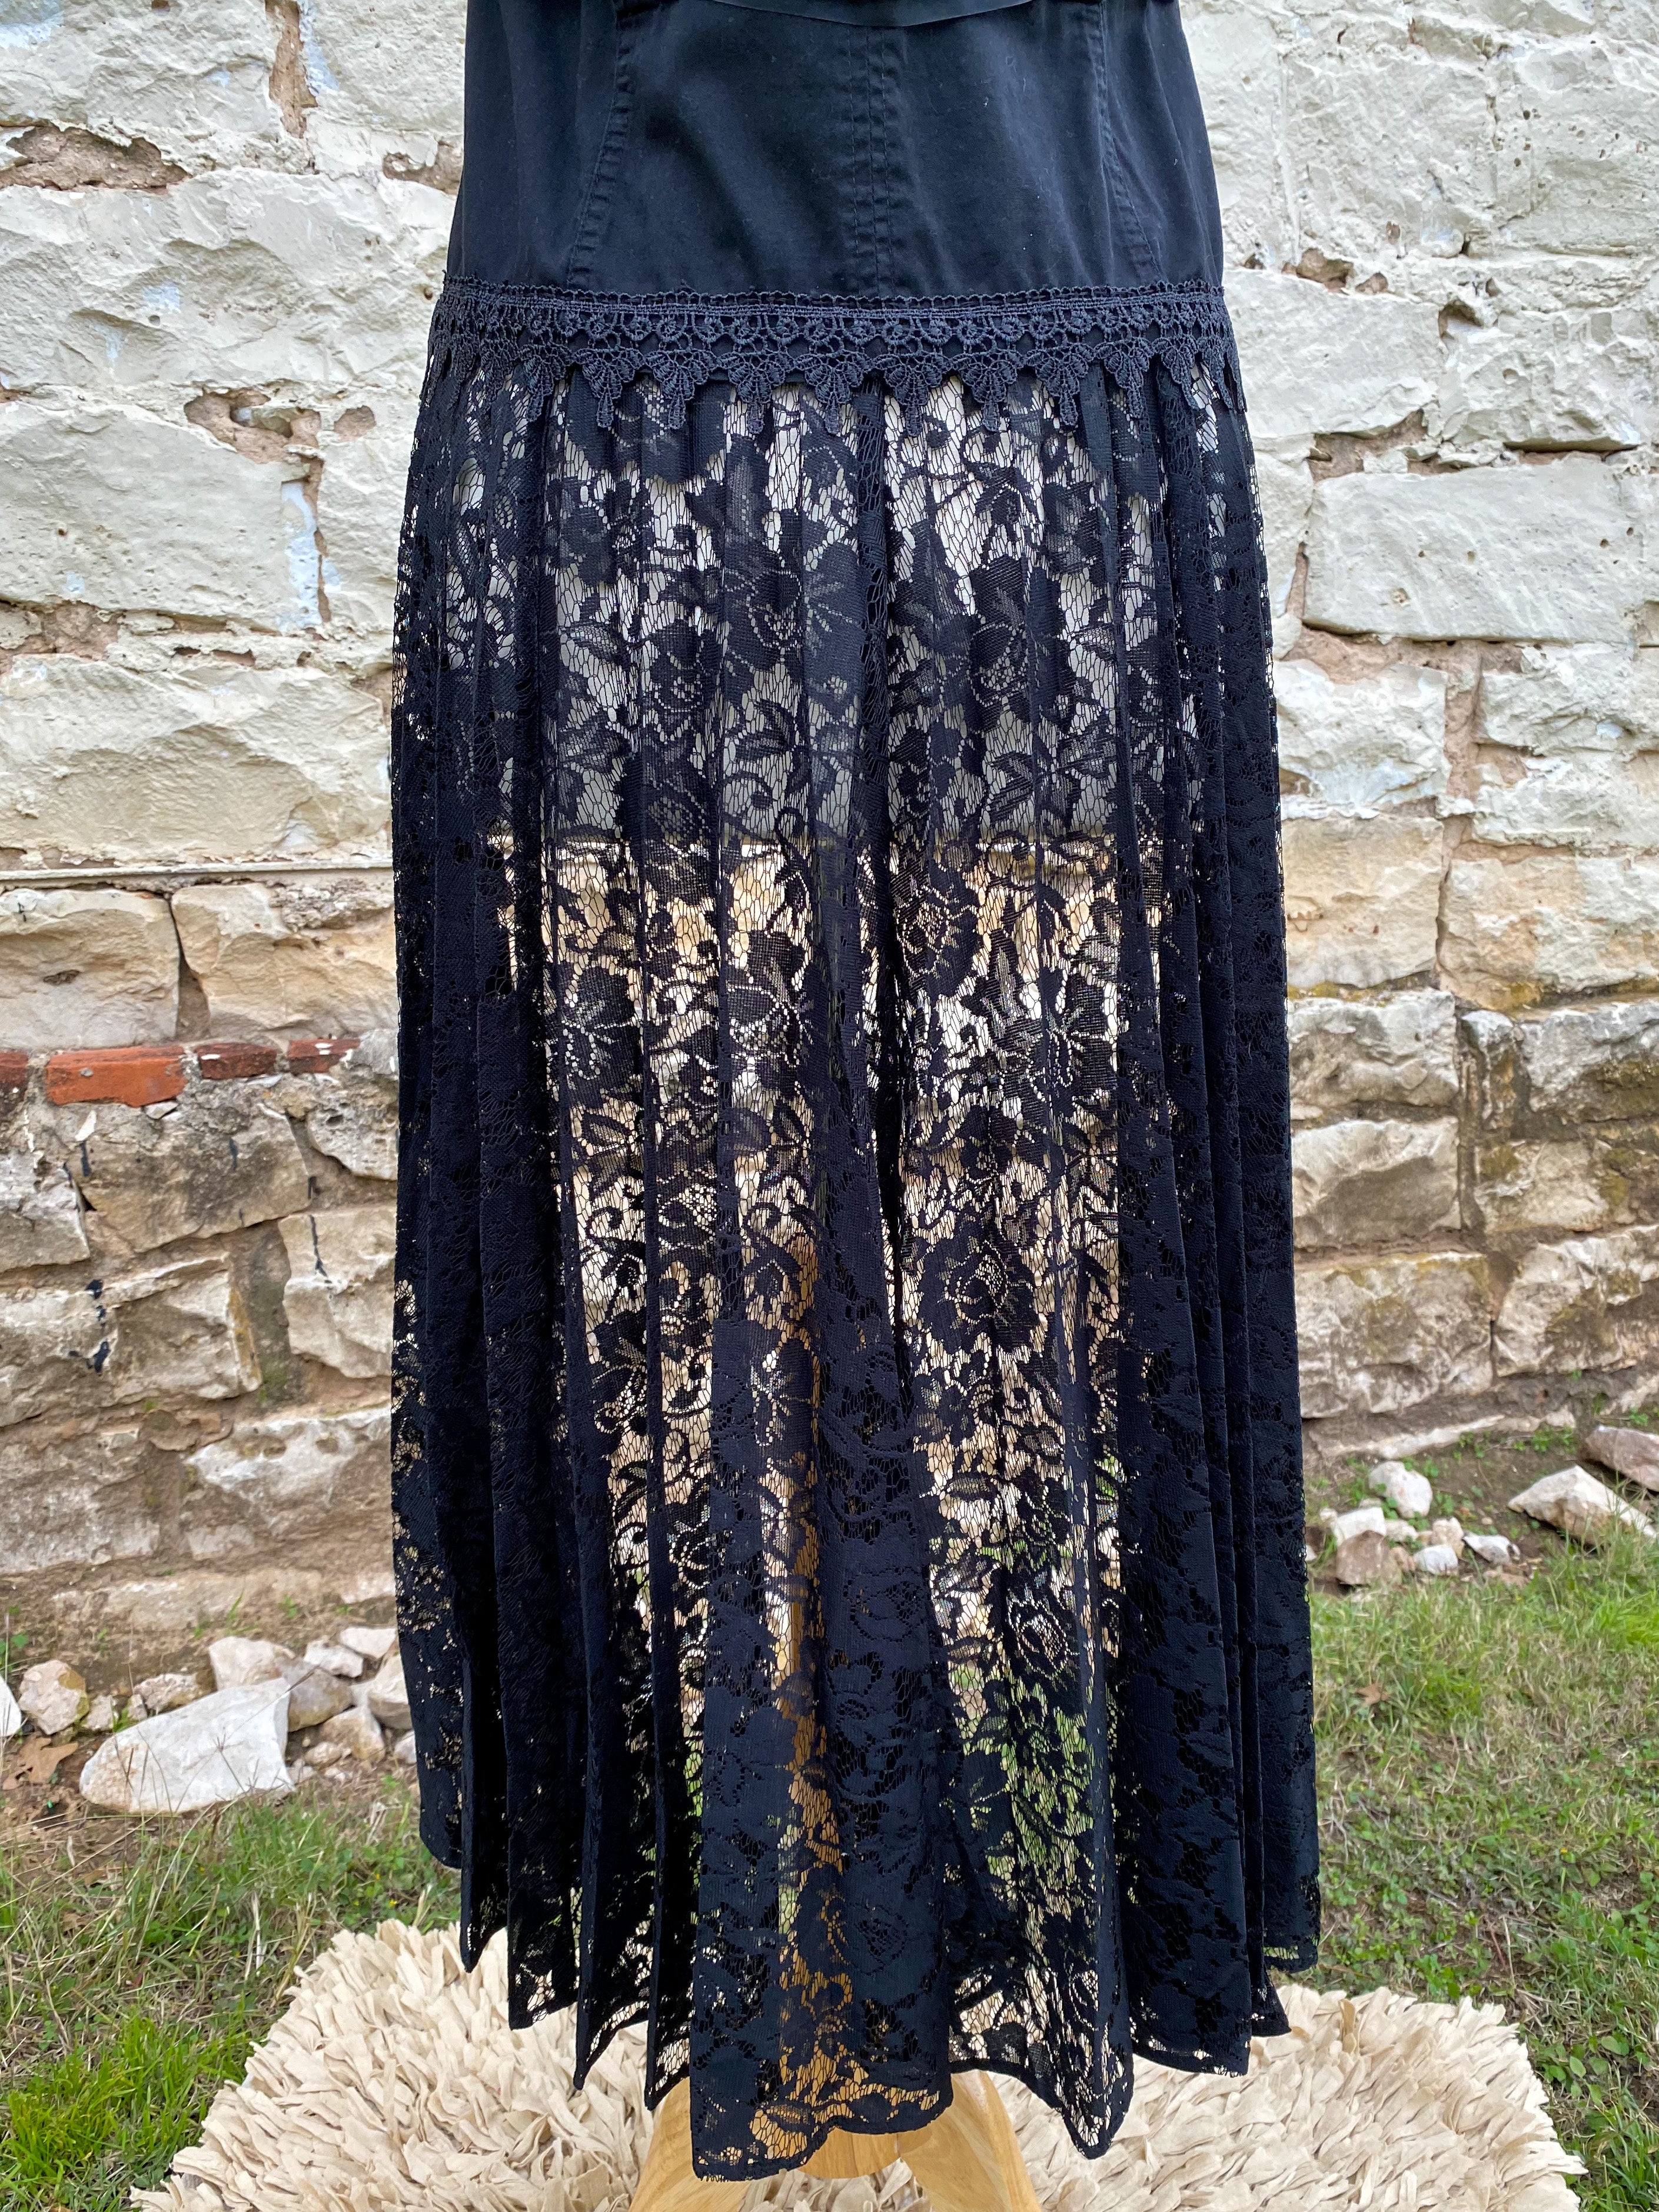 Black Vest with Crystal Collar and Long Black Lace Skirt - Medium